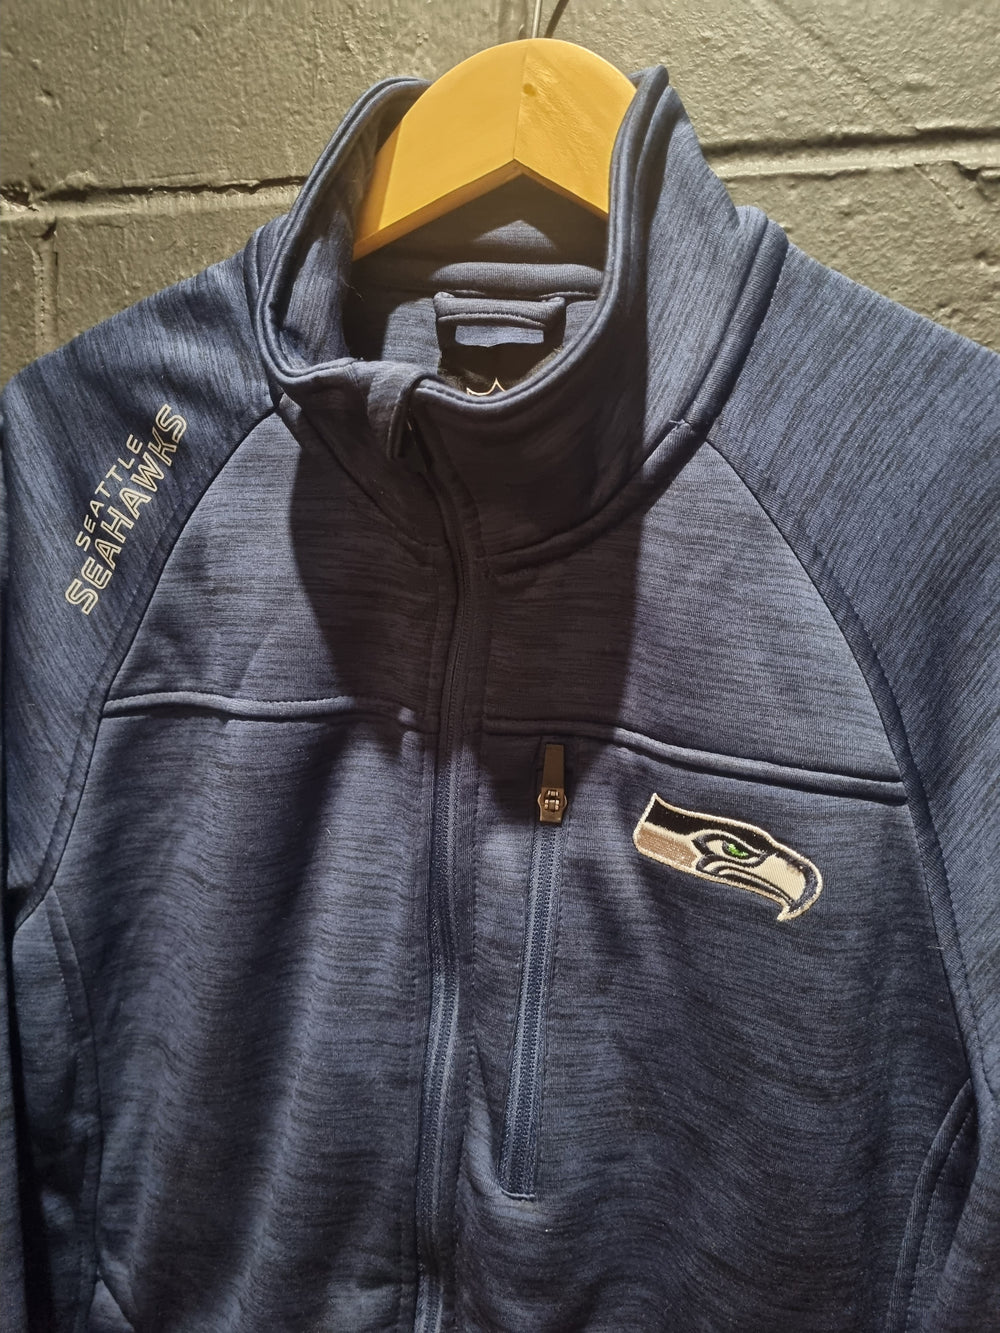 Seattle Seahawks Therma Fit Reflective Jacket Small